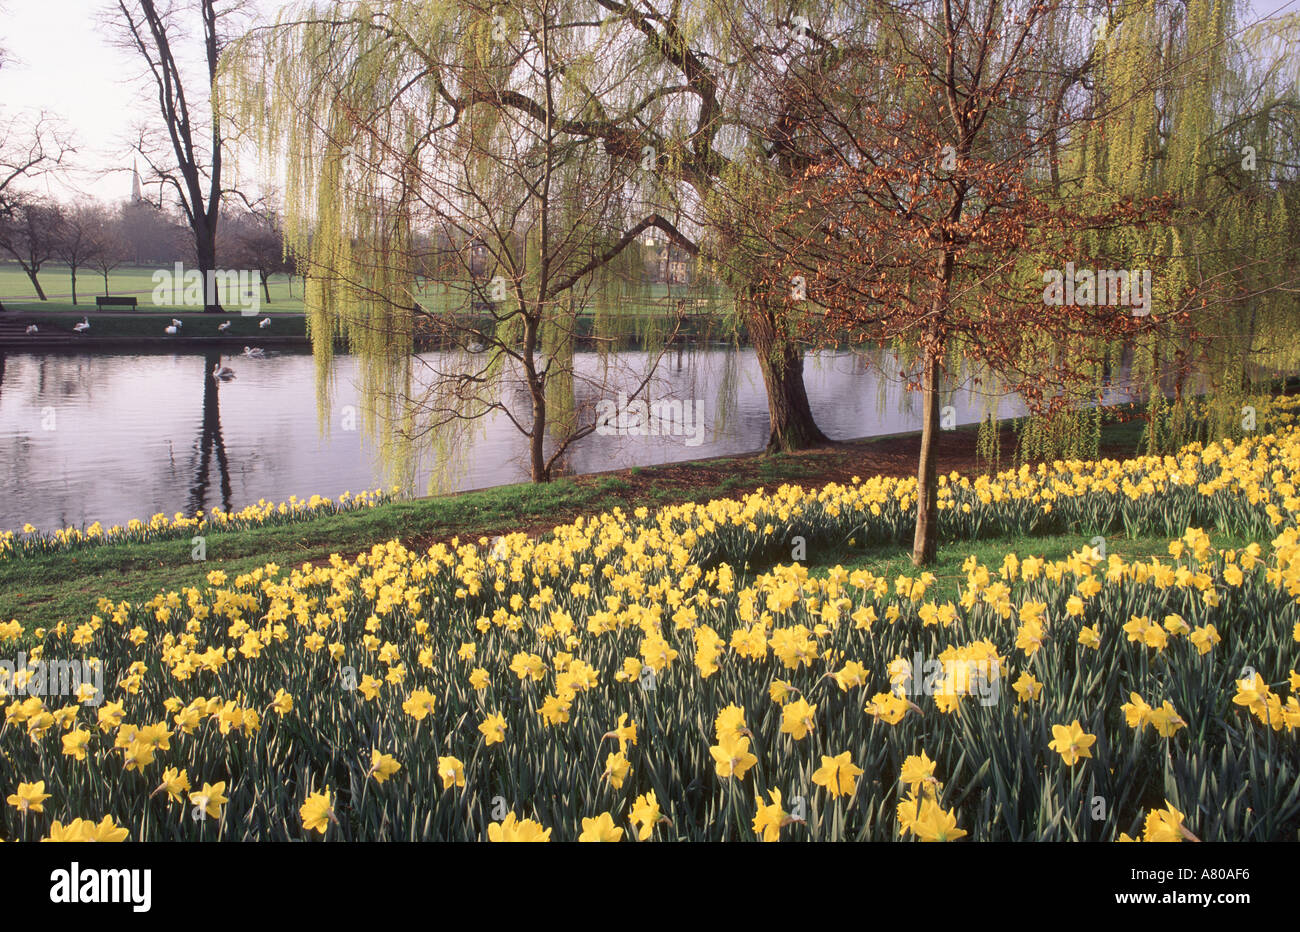 Daffodils in spring in flower on the banks of the River Cam Cambridge England Great Britain Stock Photo